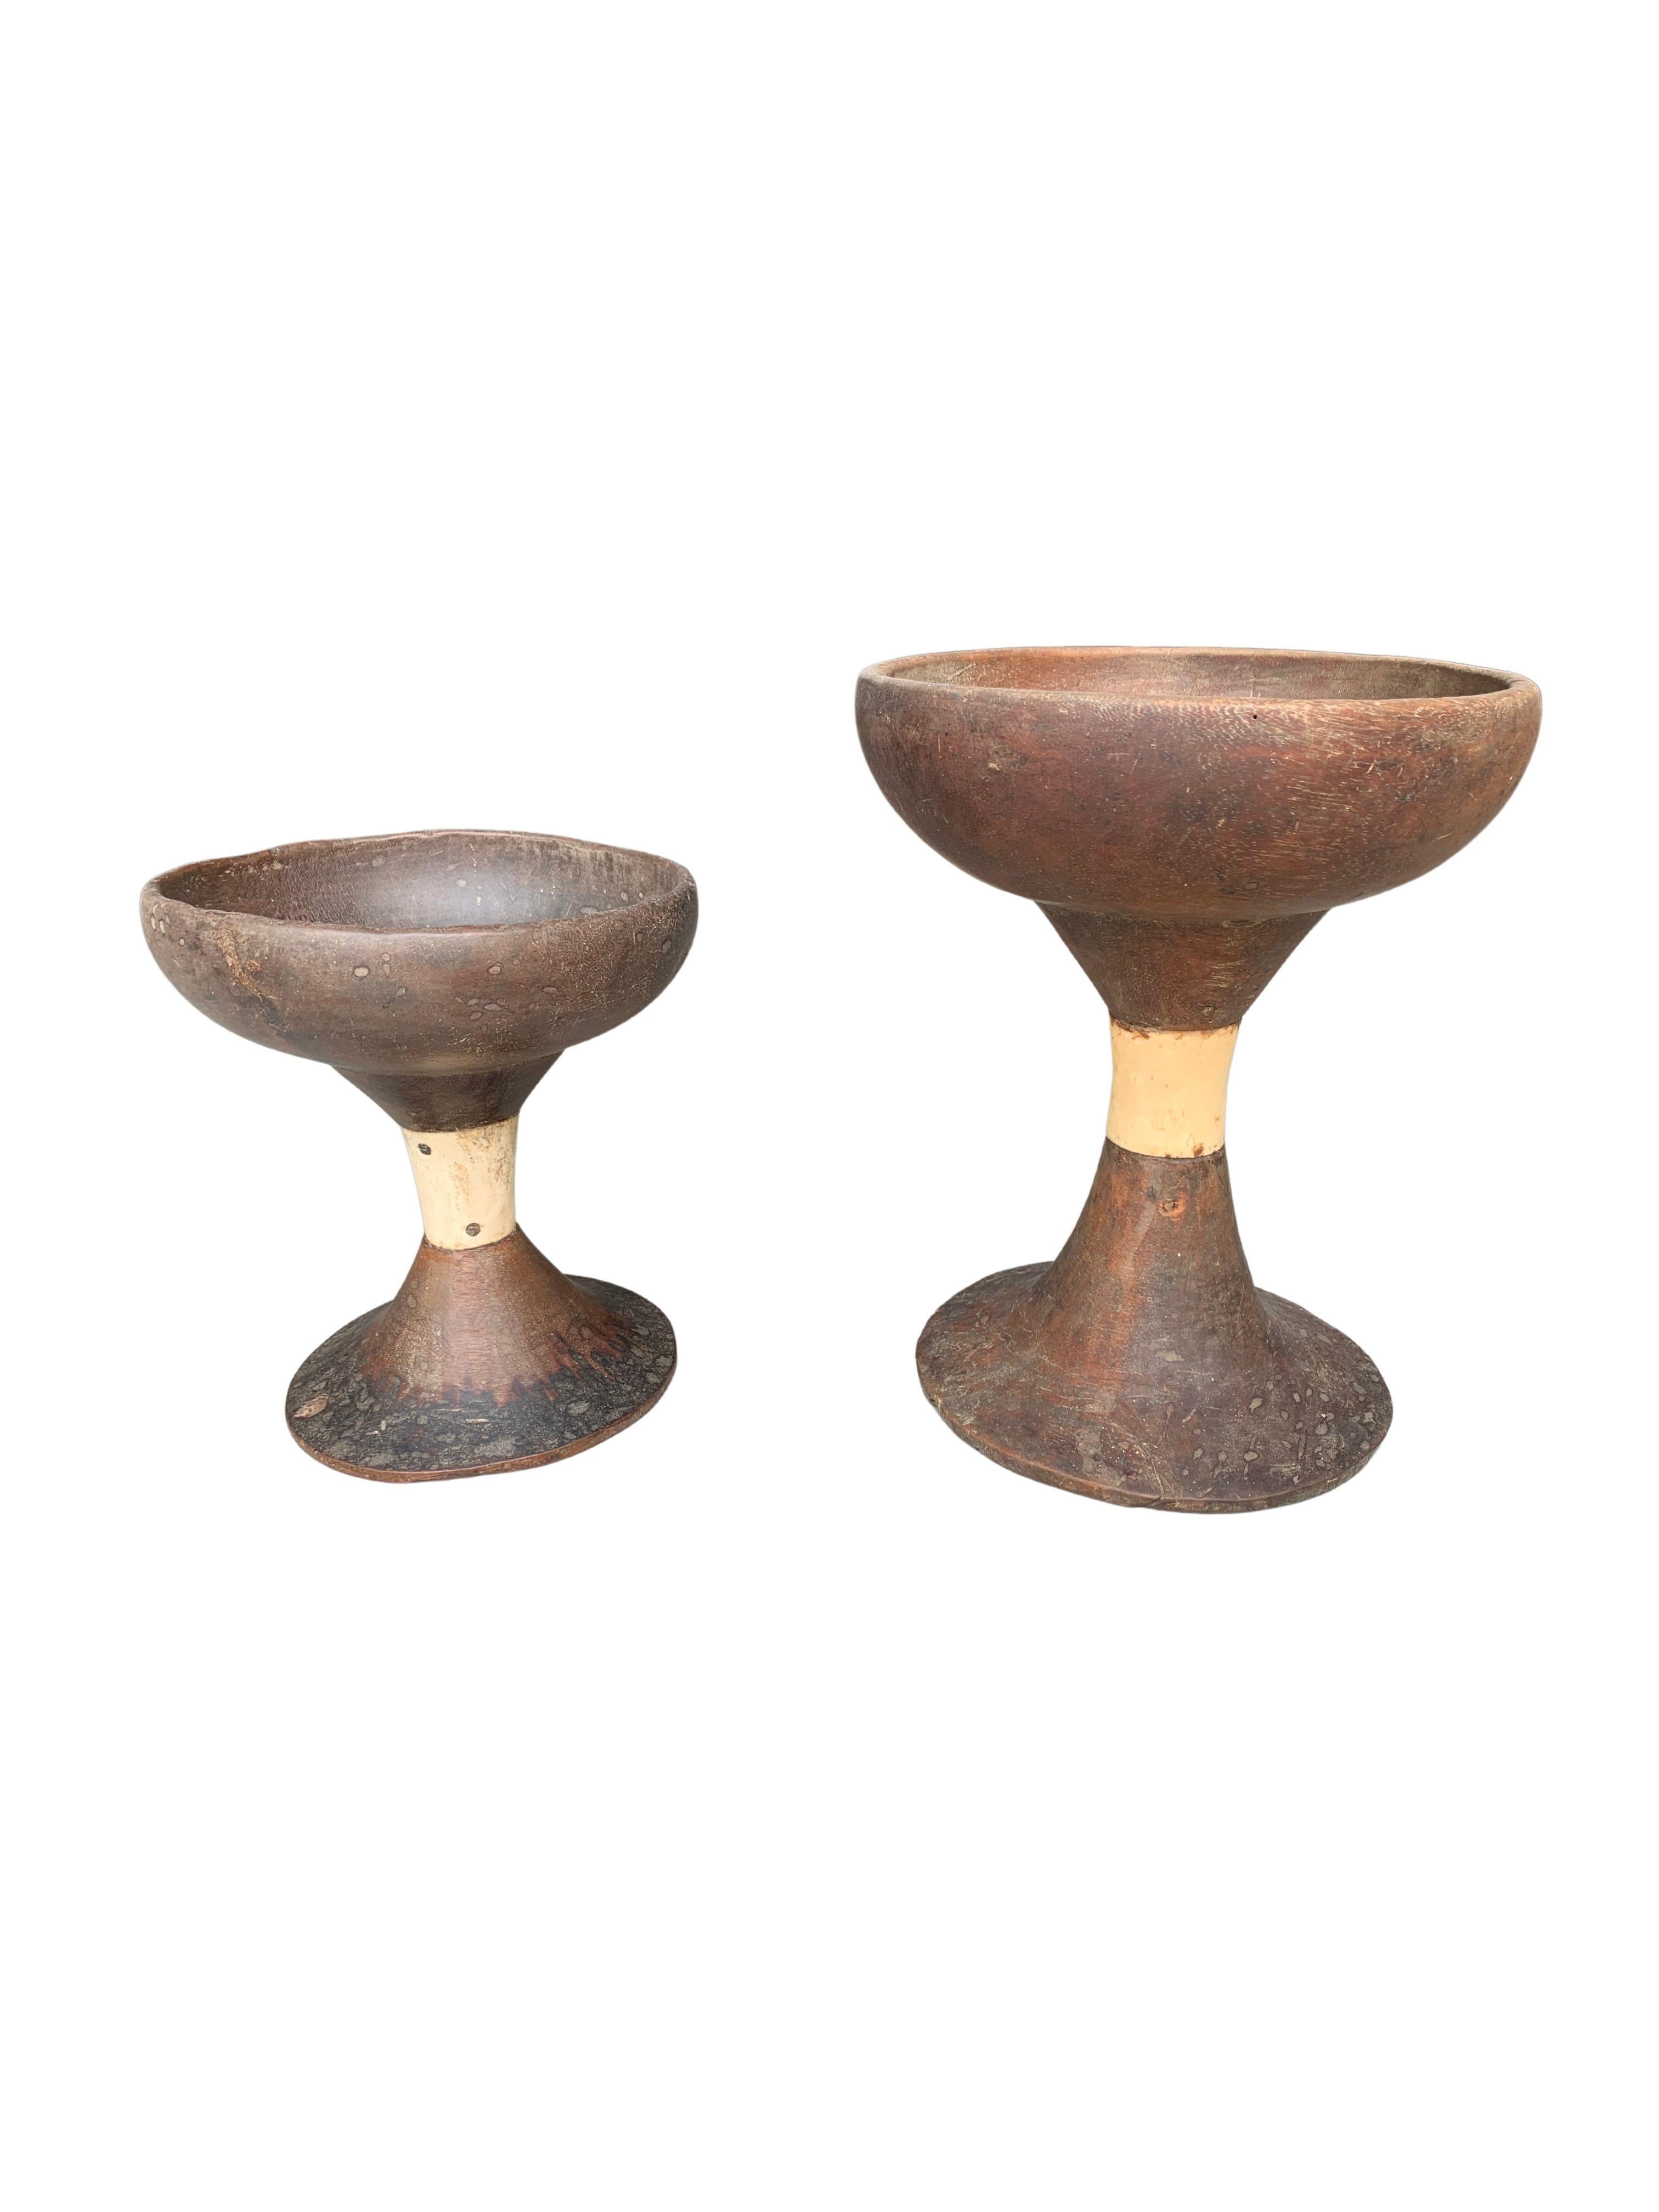 Other Pair of Toraja Wood Ceremonial Bowls, Sulawesi, Indonesia, c. 1900 For Sale